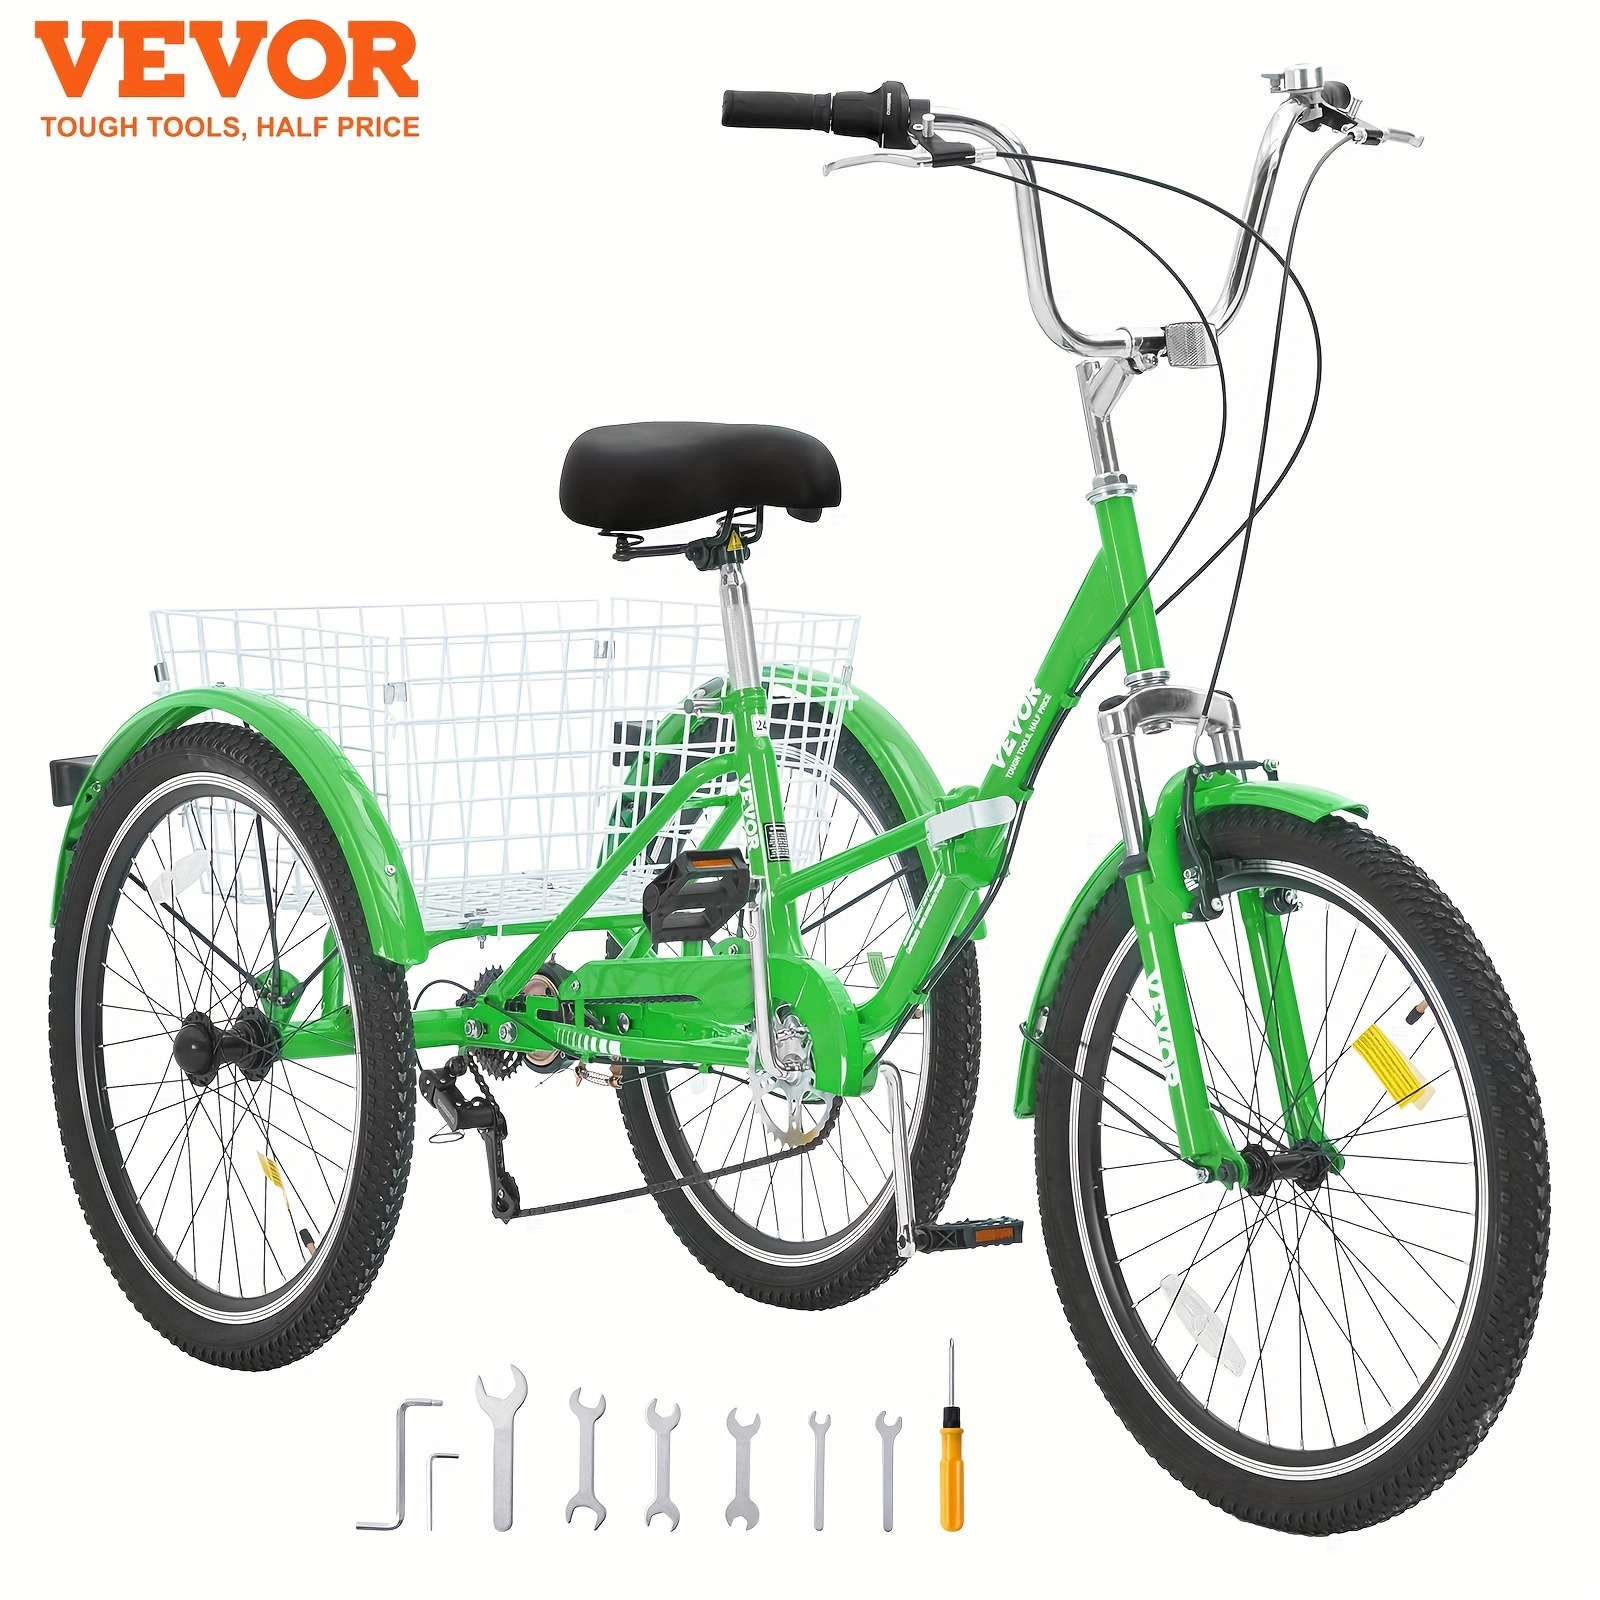 

Folding Adult Tricycle 26" 7-speed Adult 3 Wheel Trikes Carbon Steel Green